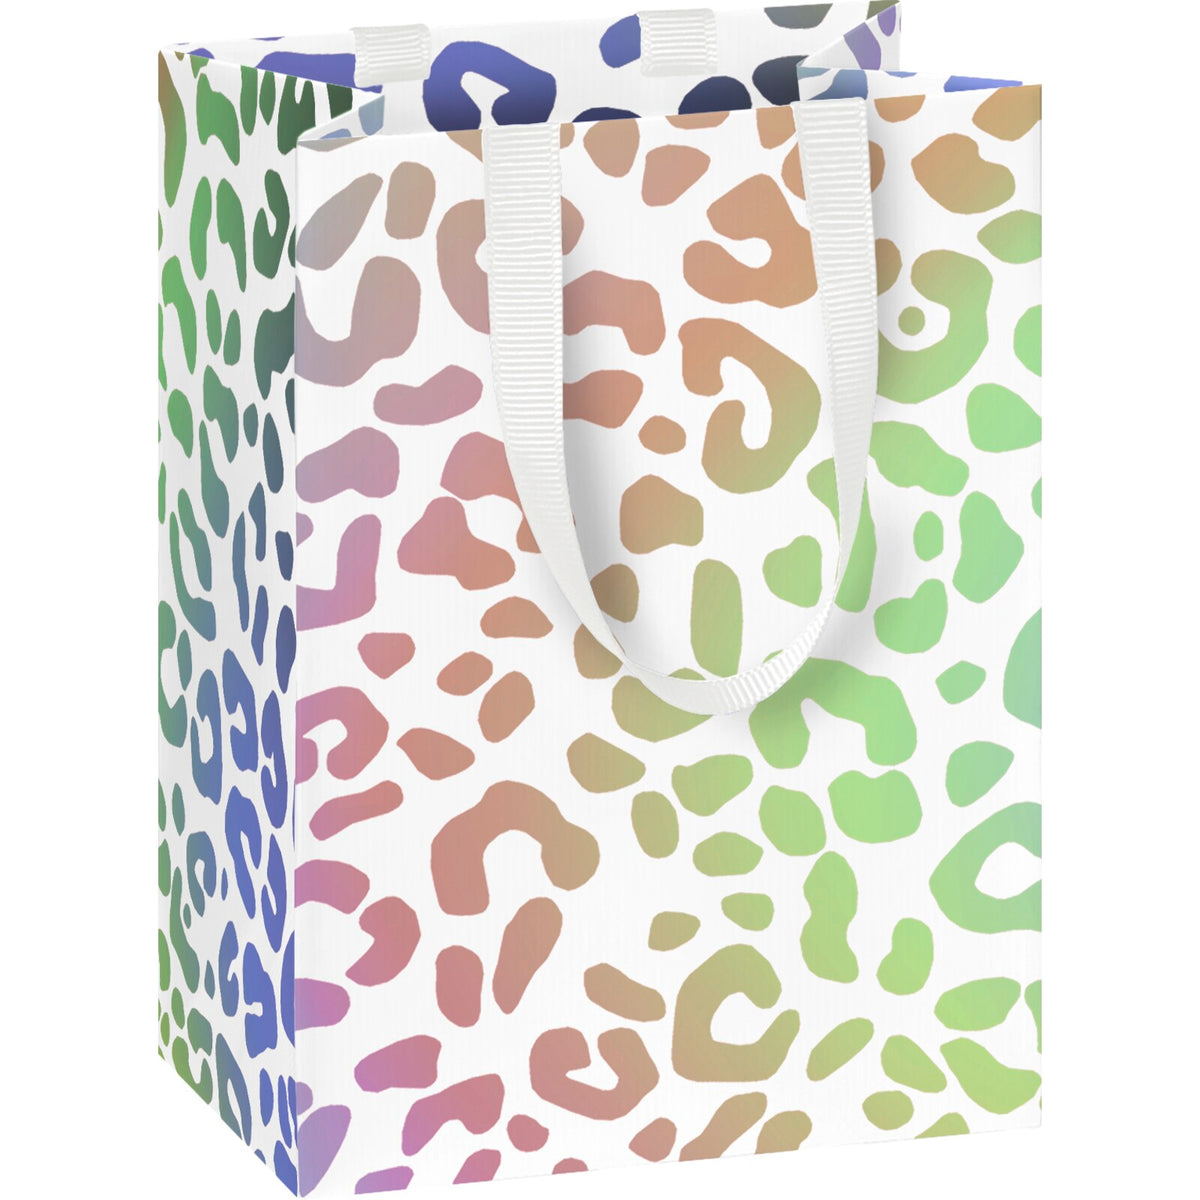 Forby Birthday Graffiti Mini Gift Bag - leopard style at penny black